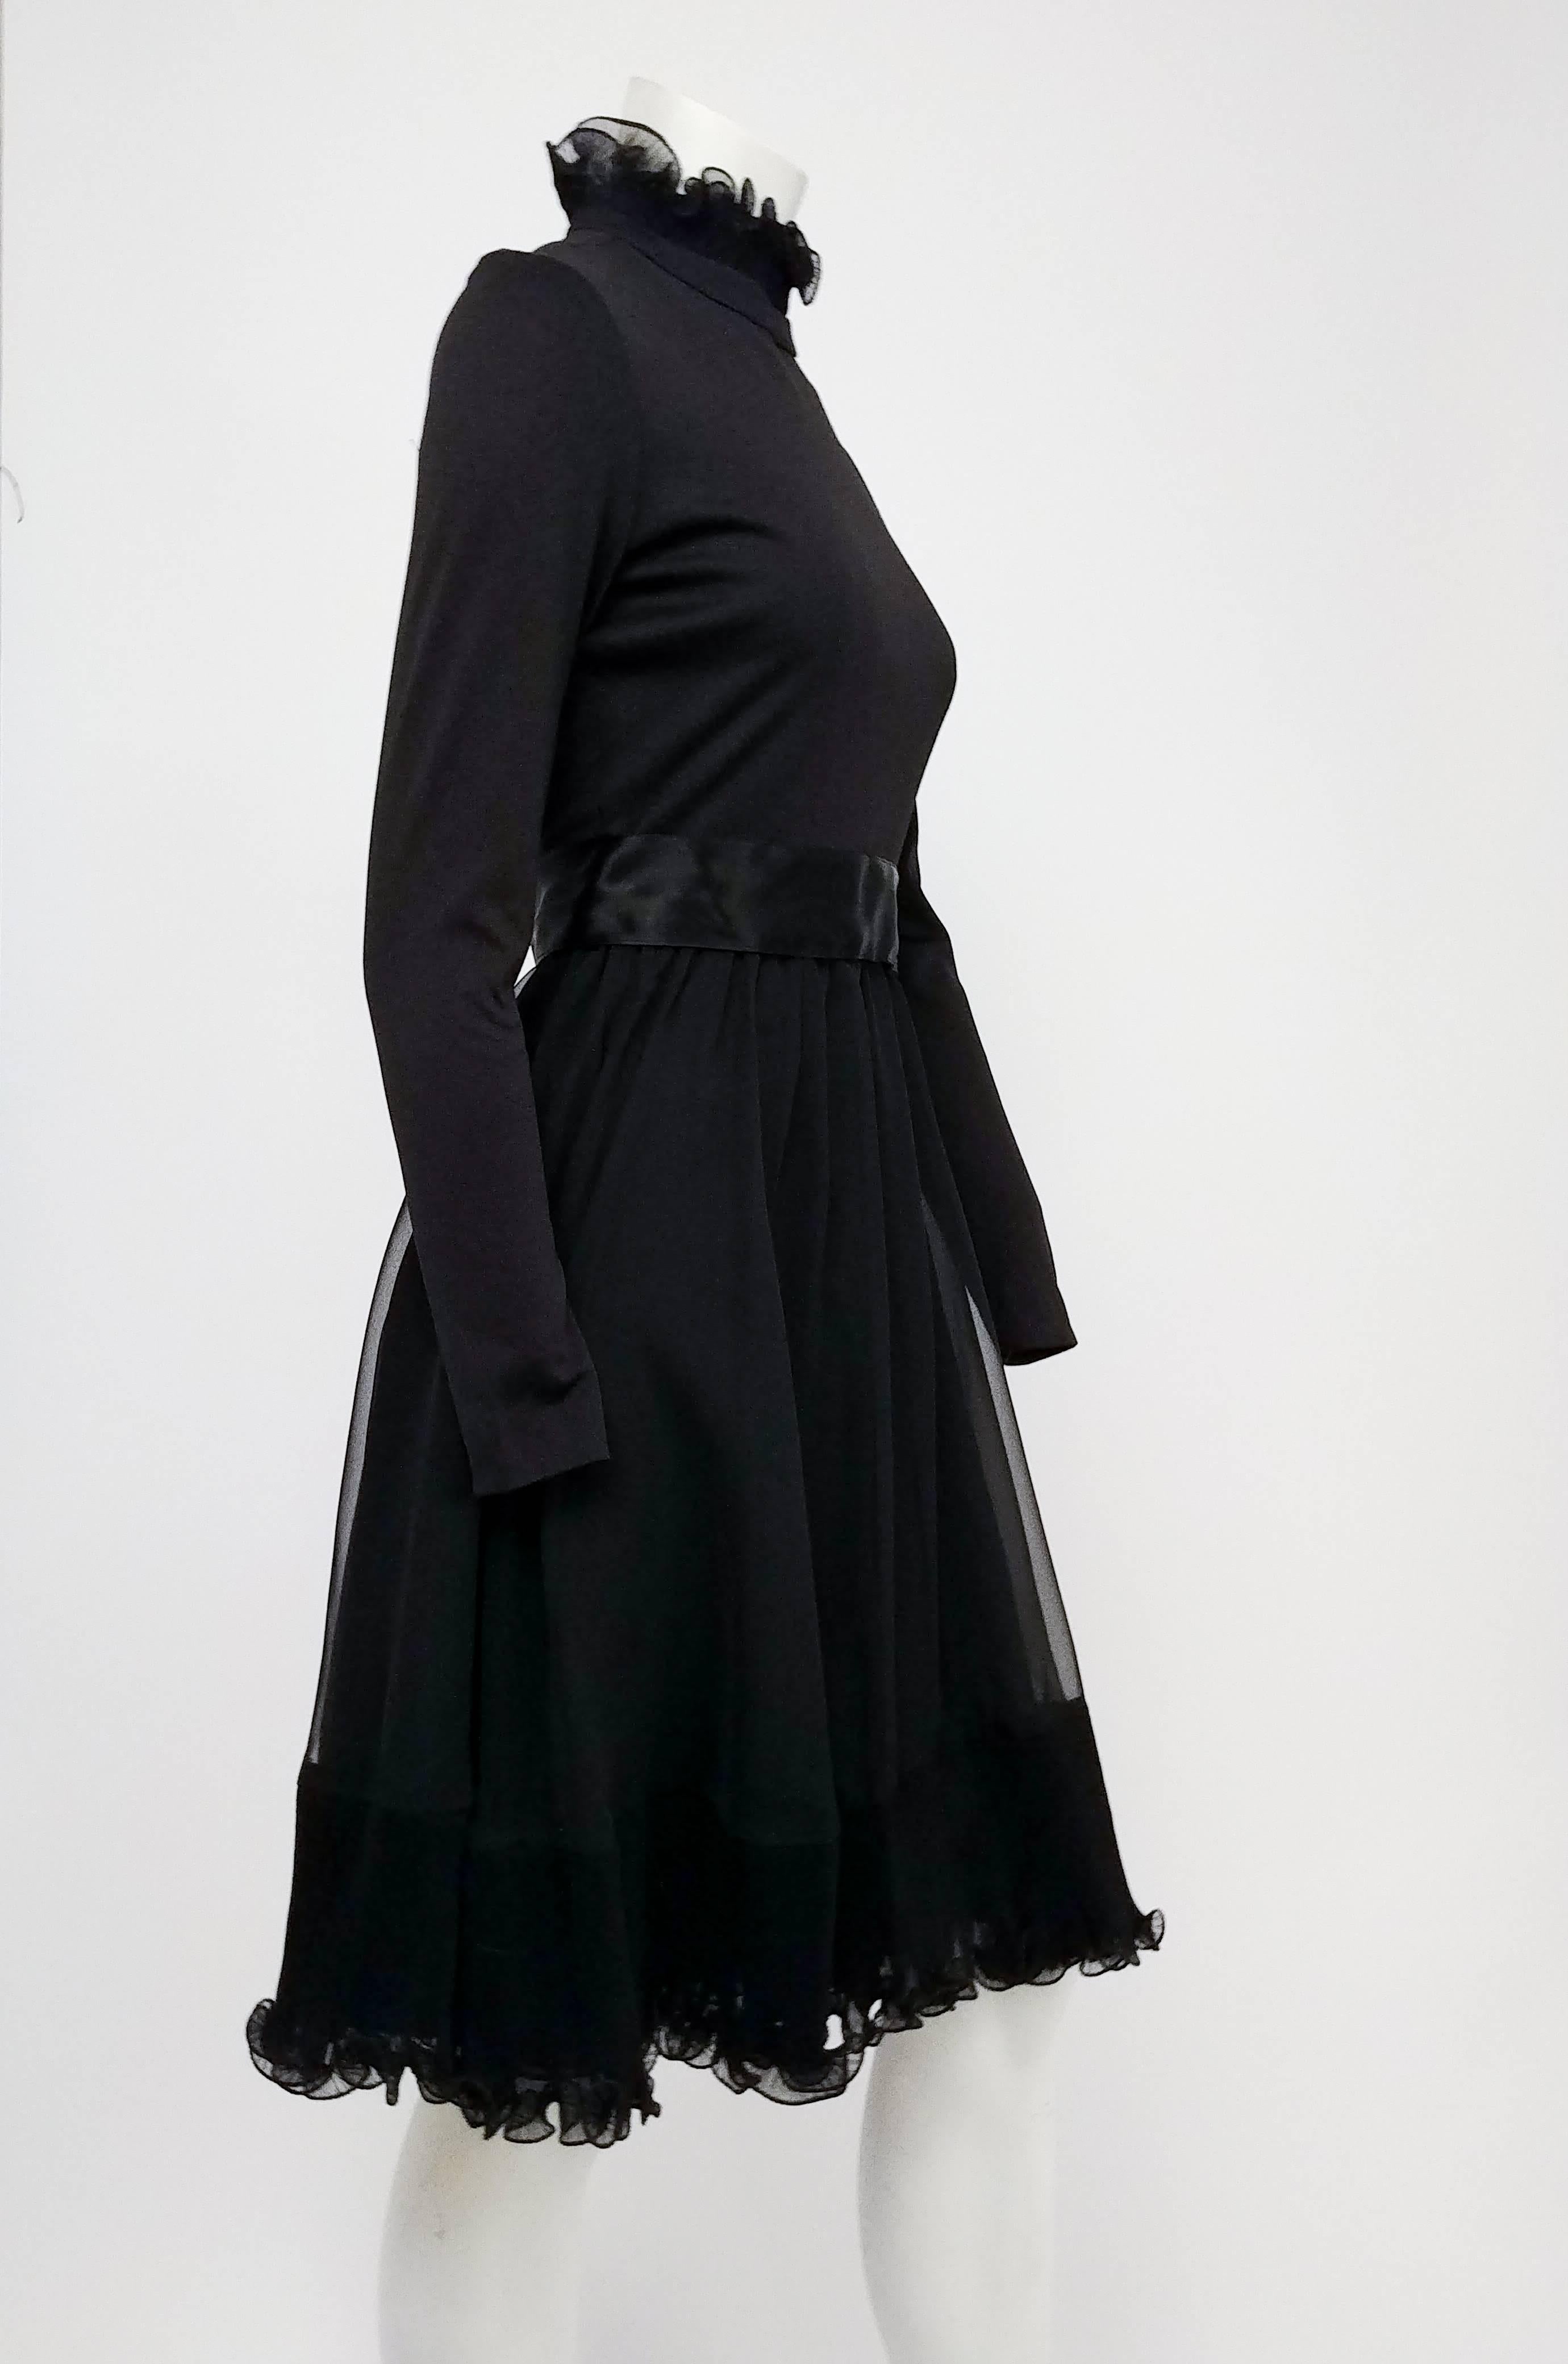 Black Cocktail Dress w/ Ruffled Skirt, 1960s. Elegant high collar with set pleated ruffles matches pleated ruffle trim at hem. Jersey knit bodice, satin belt hooks at back. Slightly flared skirt gives off a feminine, whimsical silhouette. 